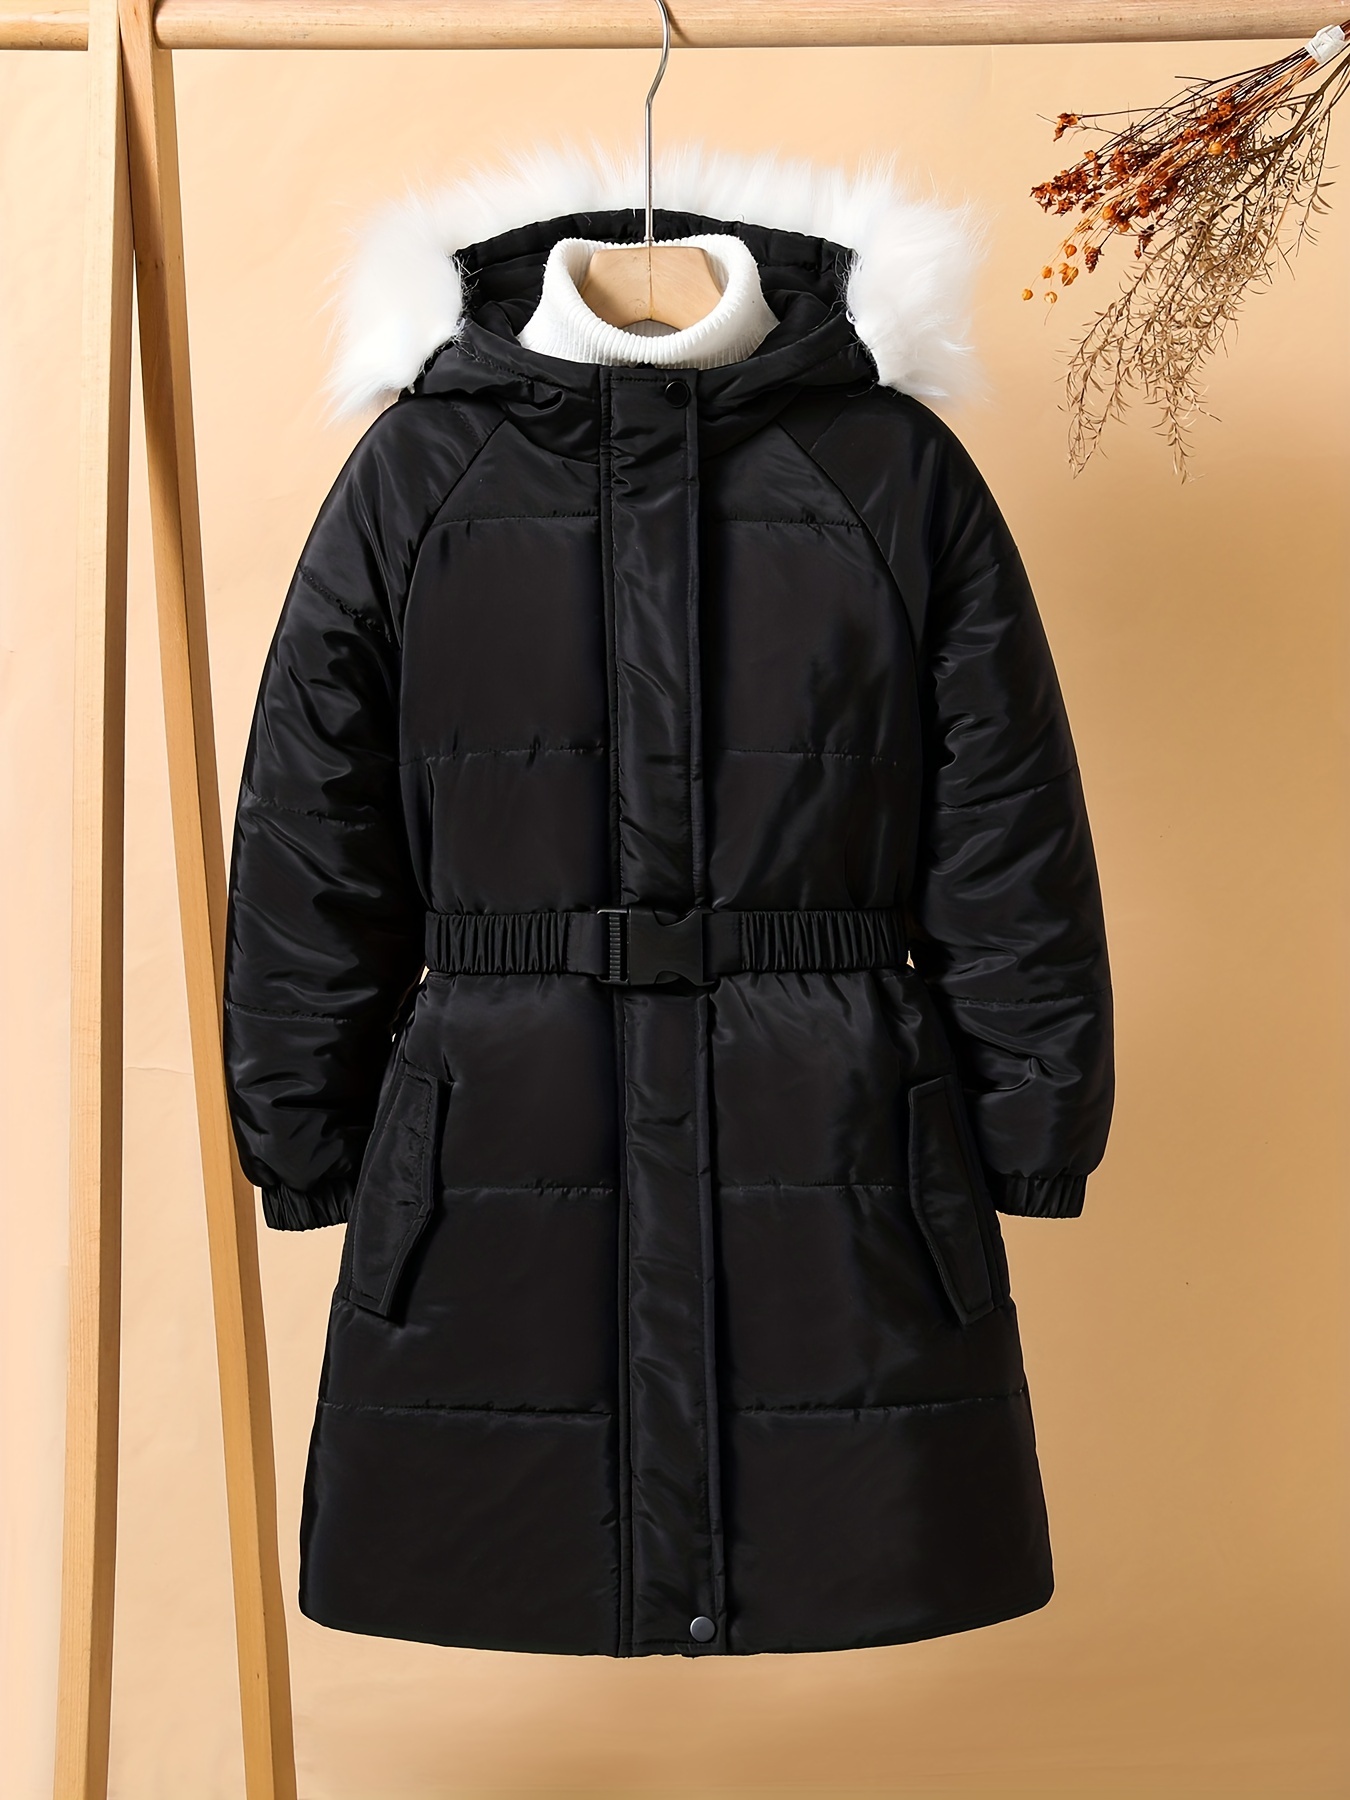 Winter Women's Jacket Hooded Solid Cotton Padded Middle-Aged Woman